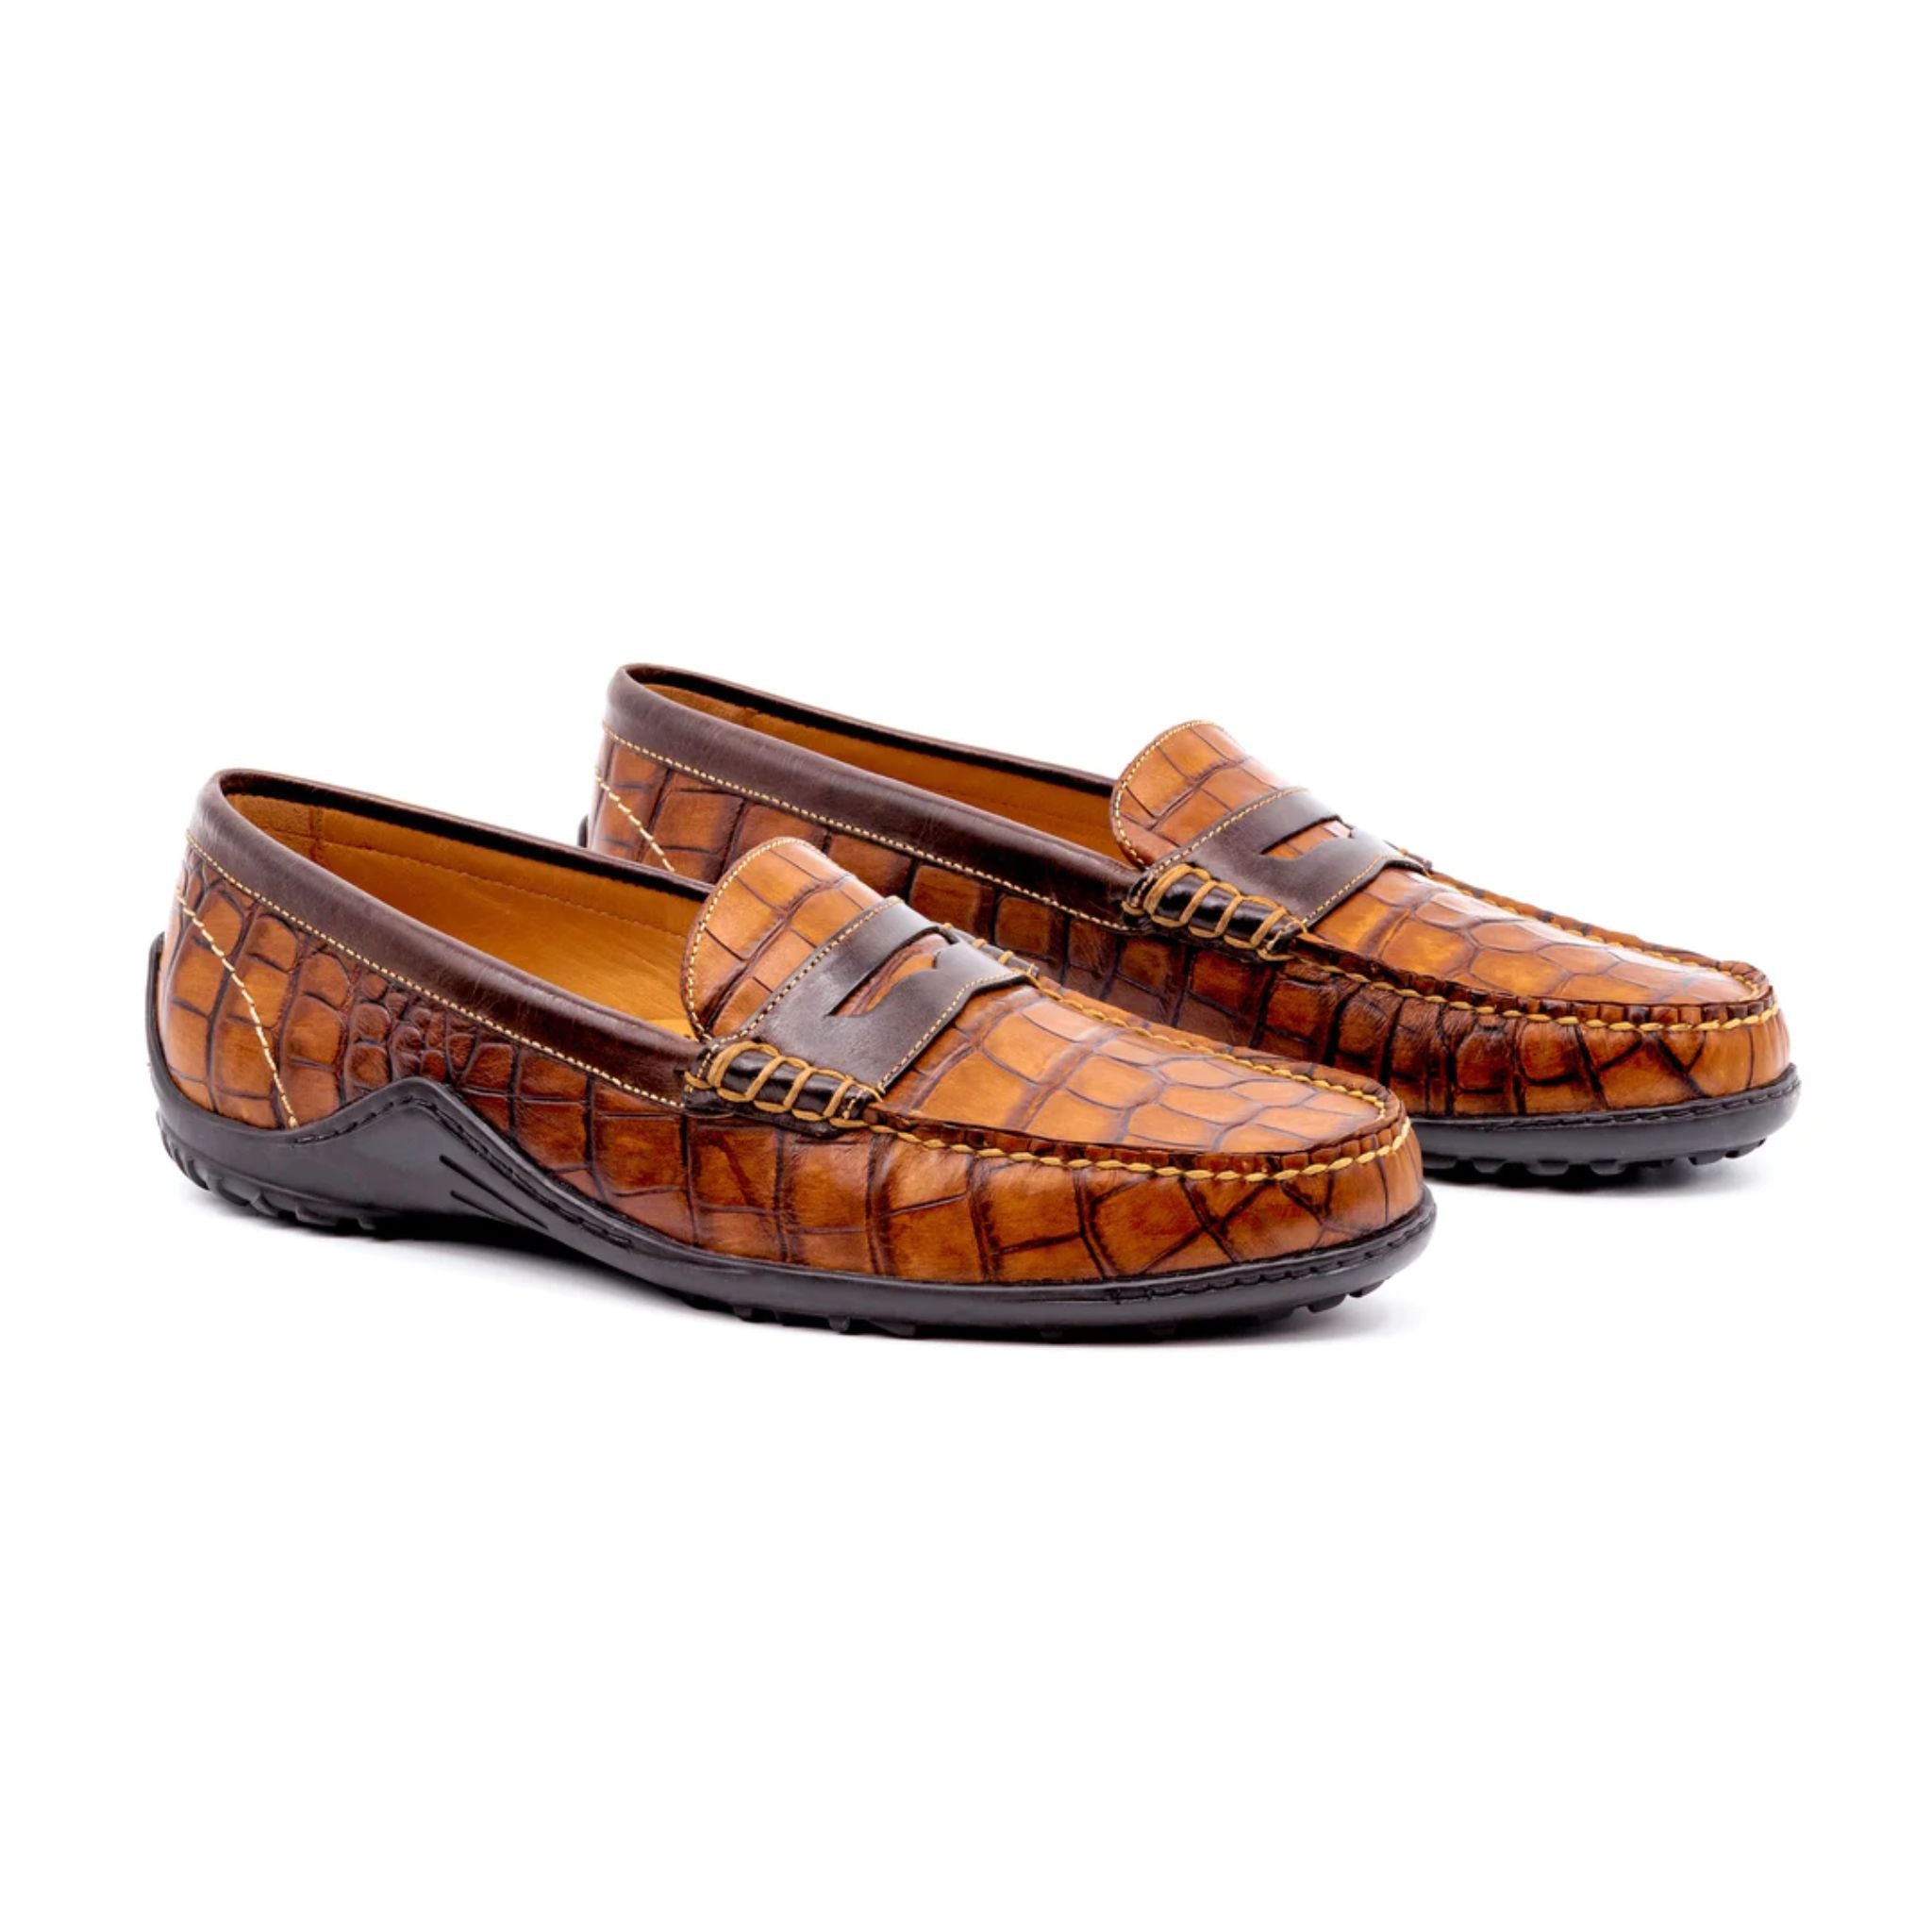 The Bill Penny Loafer- Alligator Grain Leather